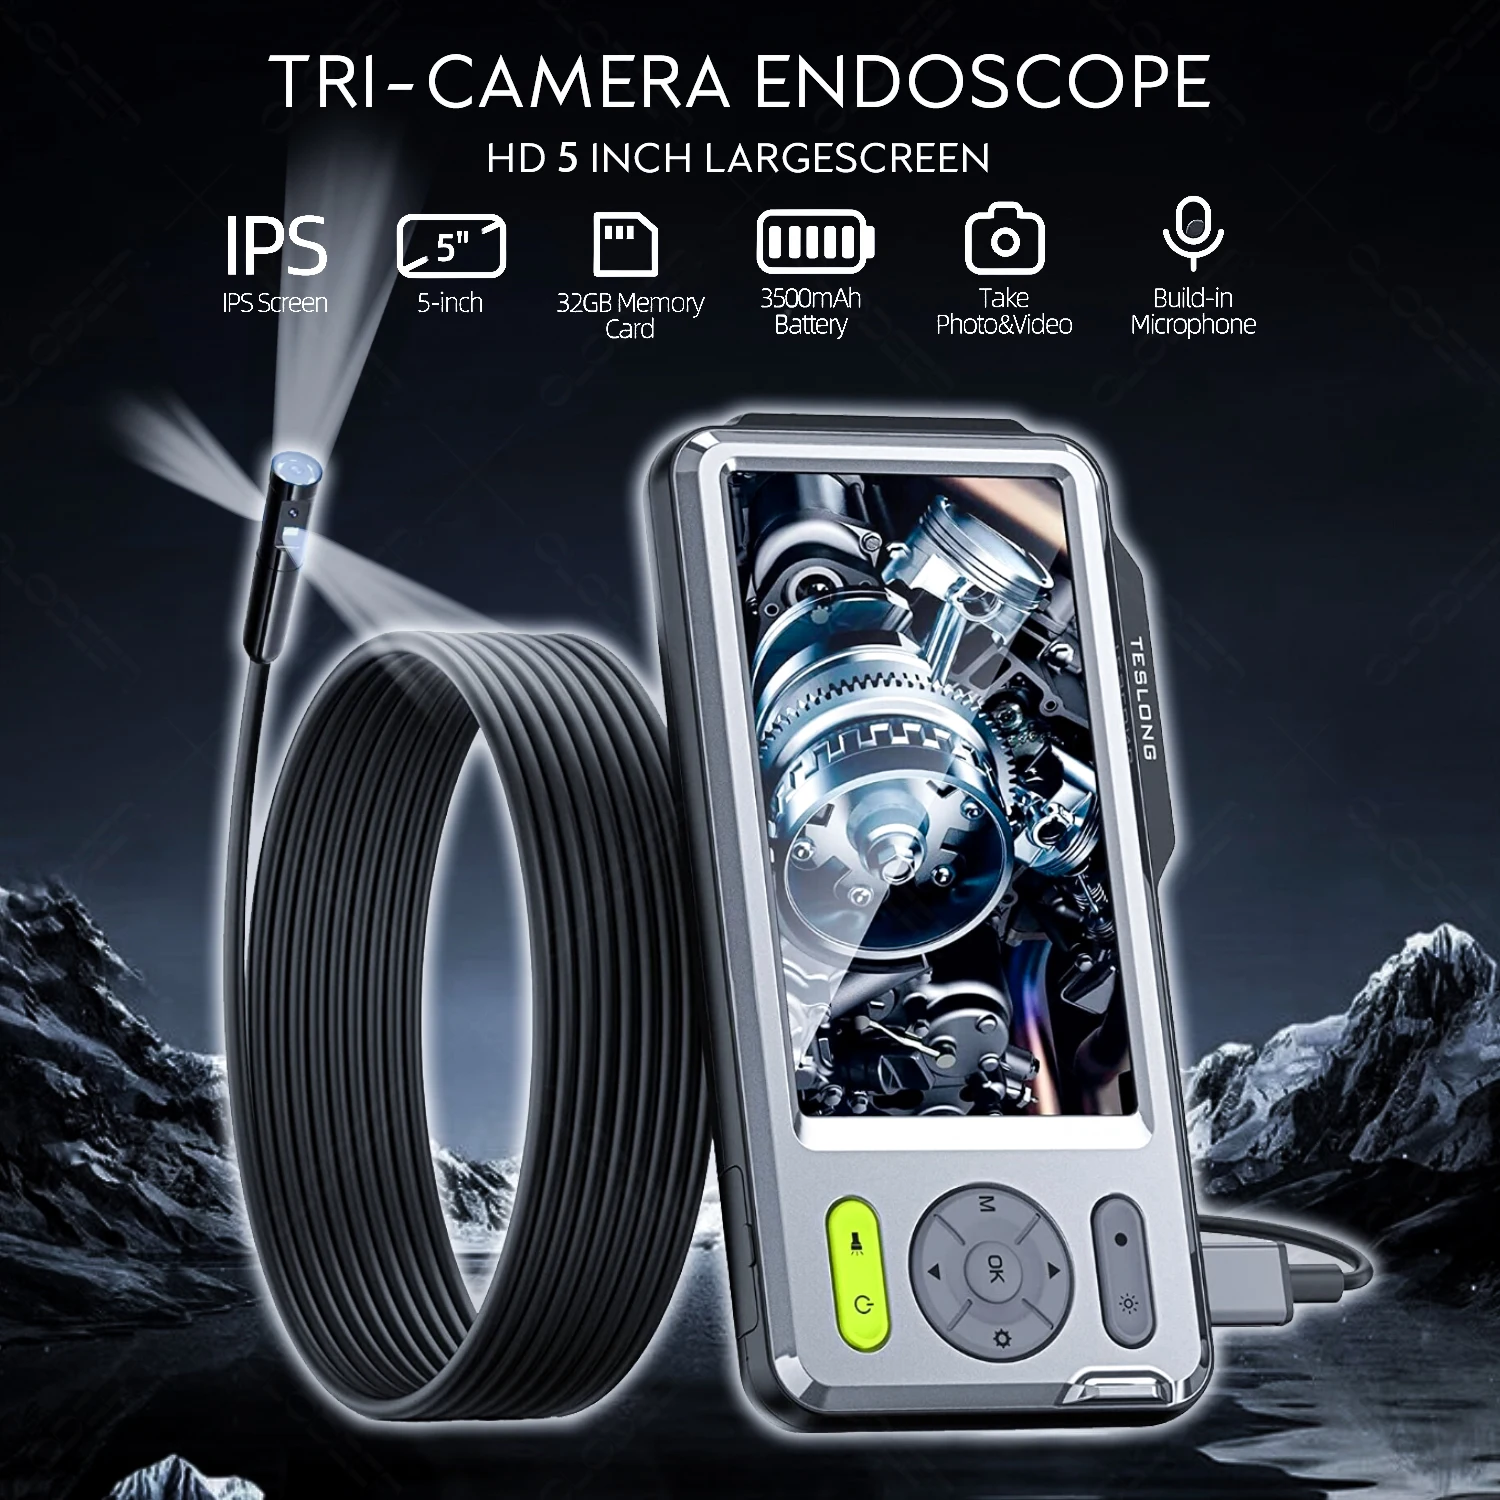 5/8mm 5in 1280P Industrial Endoscope Automotive Boroscope Stethoscope Endoscopic Camera For Cars Mobile Inspection Tools Device